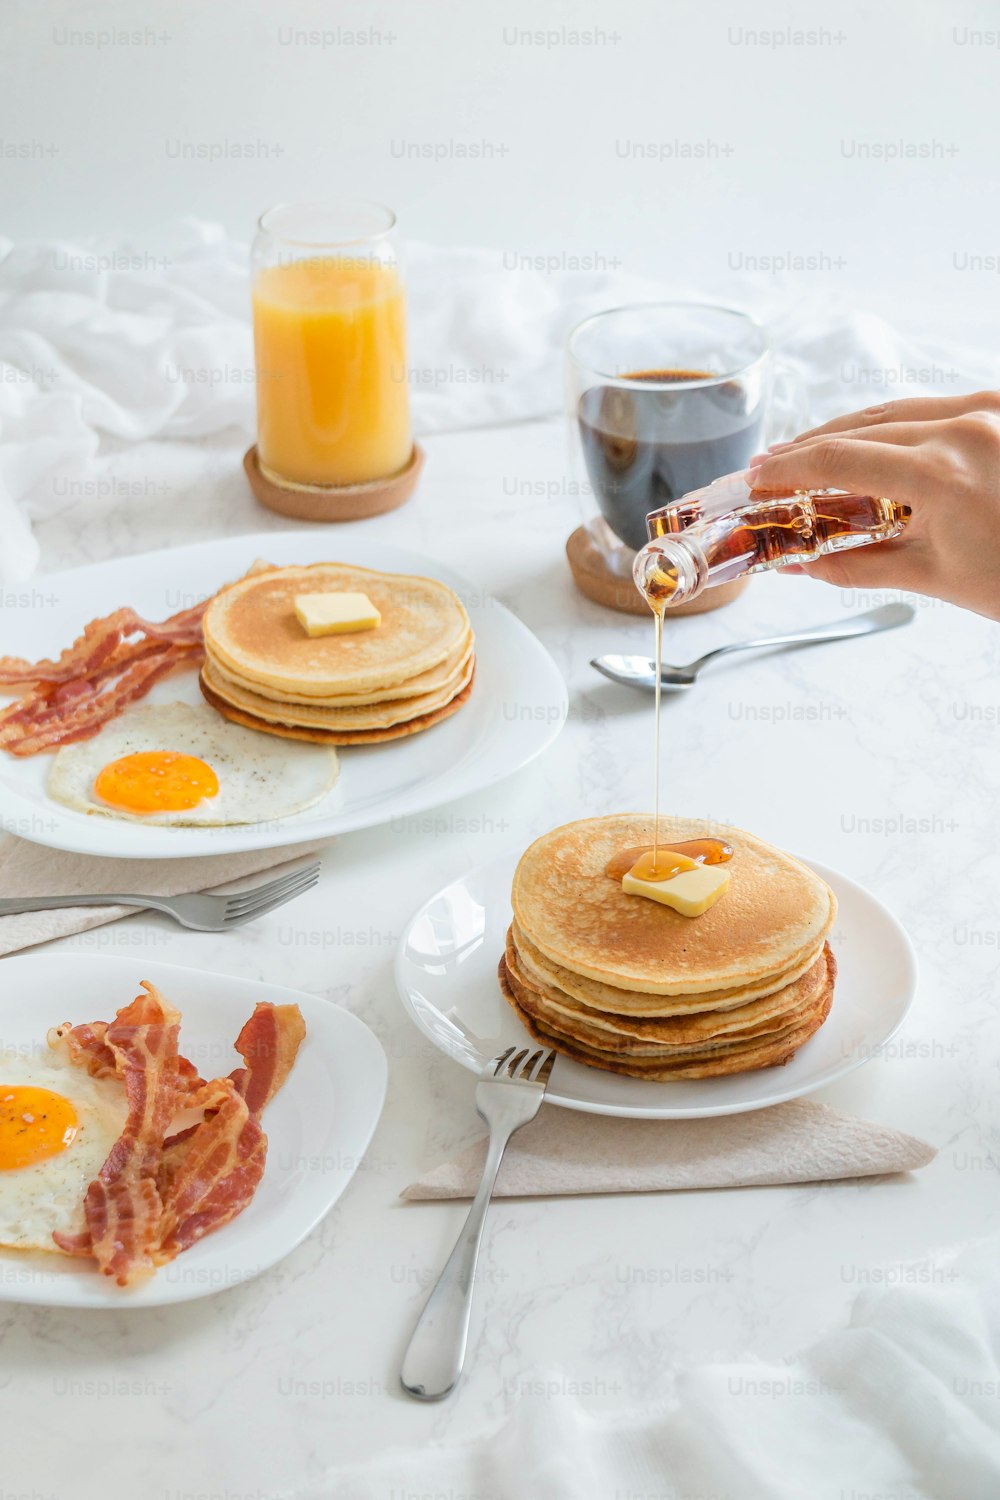 100+ Pancakes Pictures | Download Free Images on Unsplash